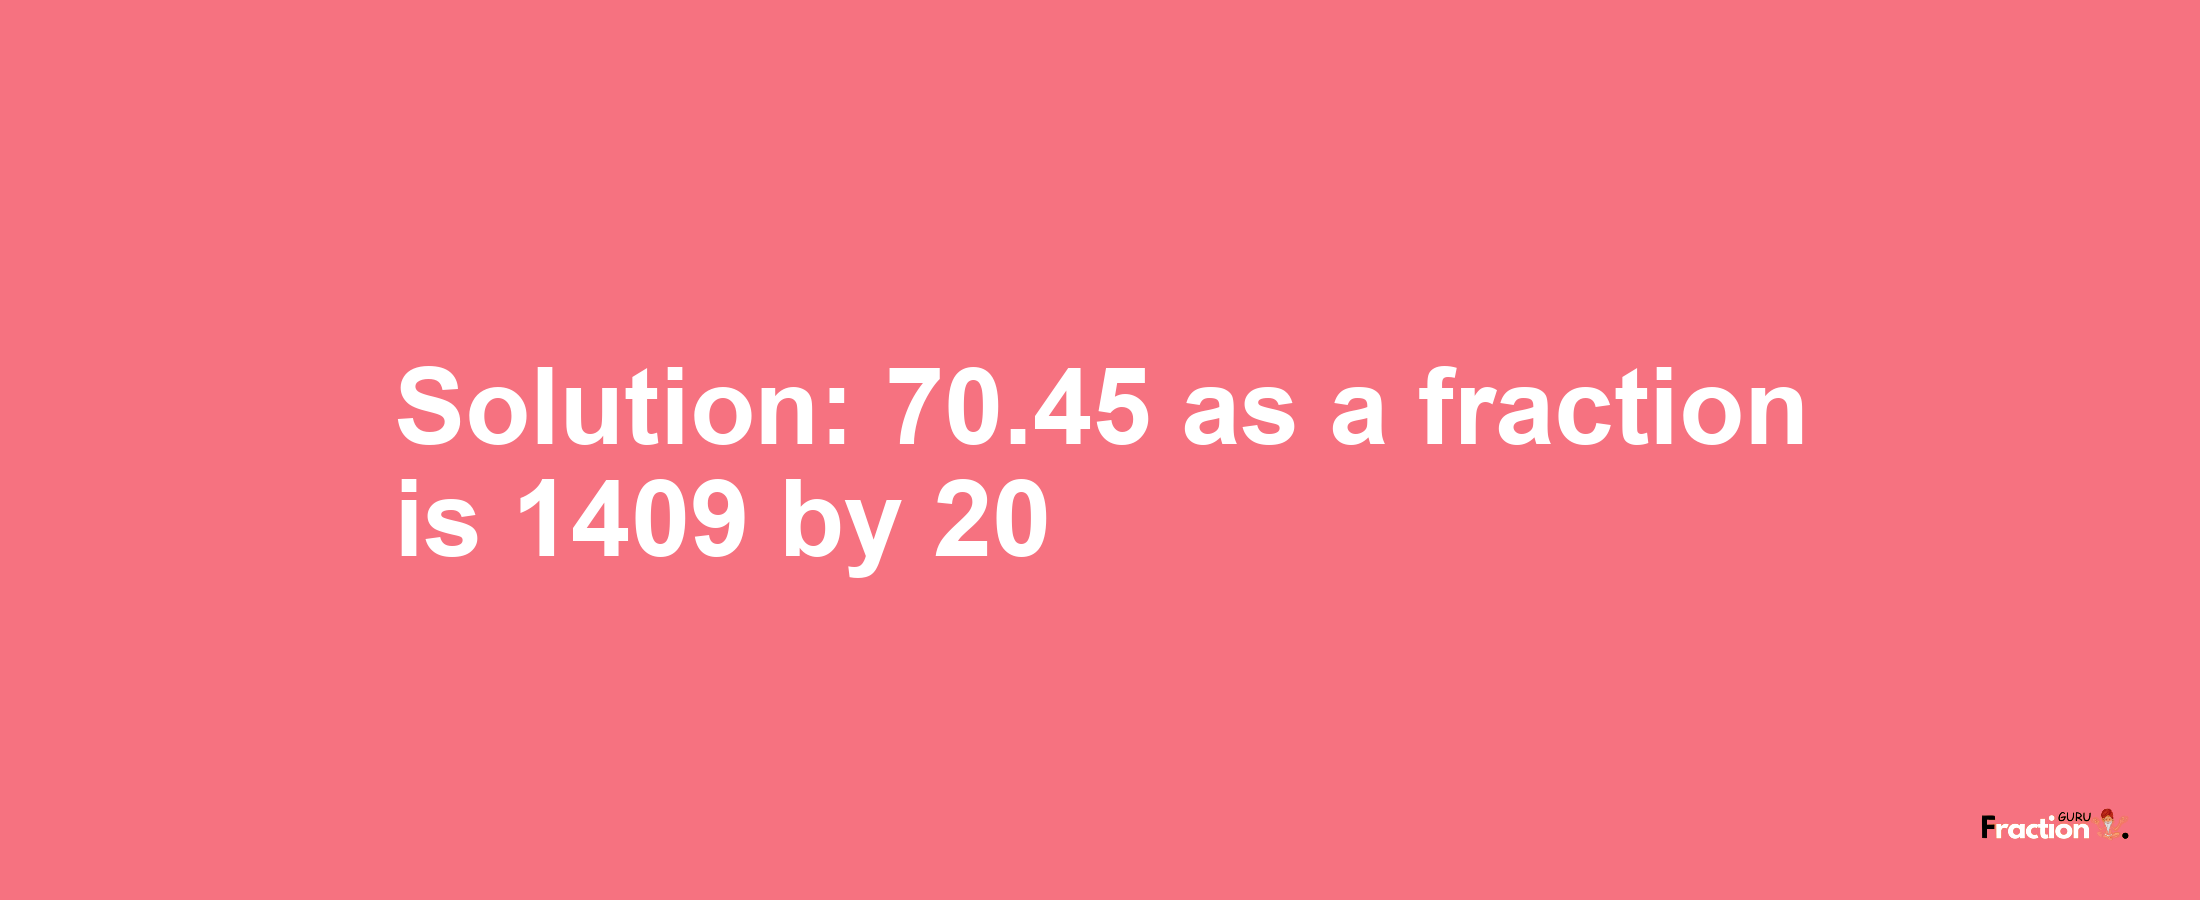 Solution:70.45 as a fraction is 1409/20